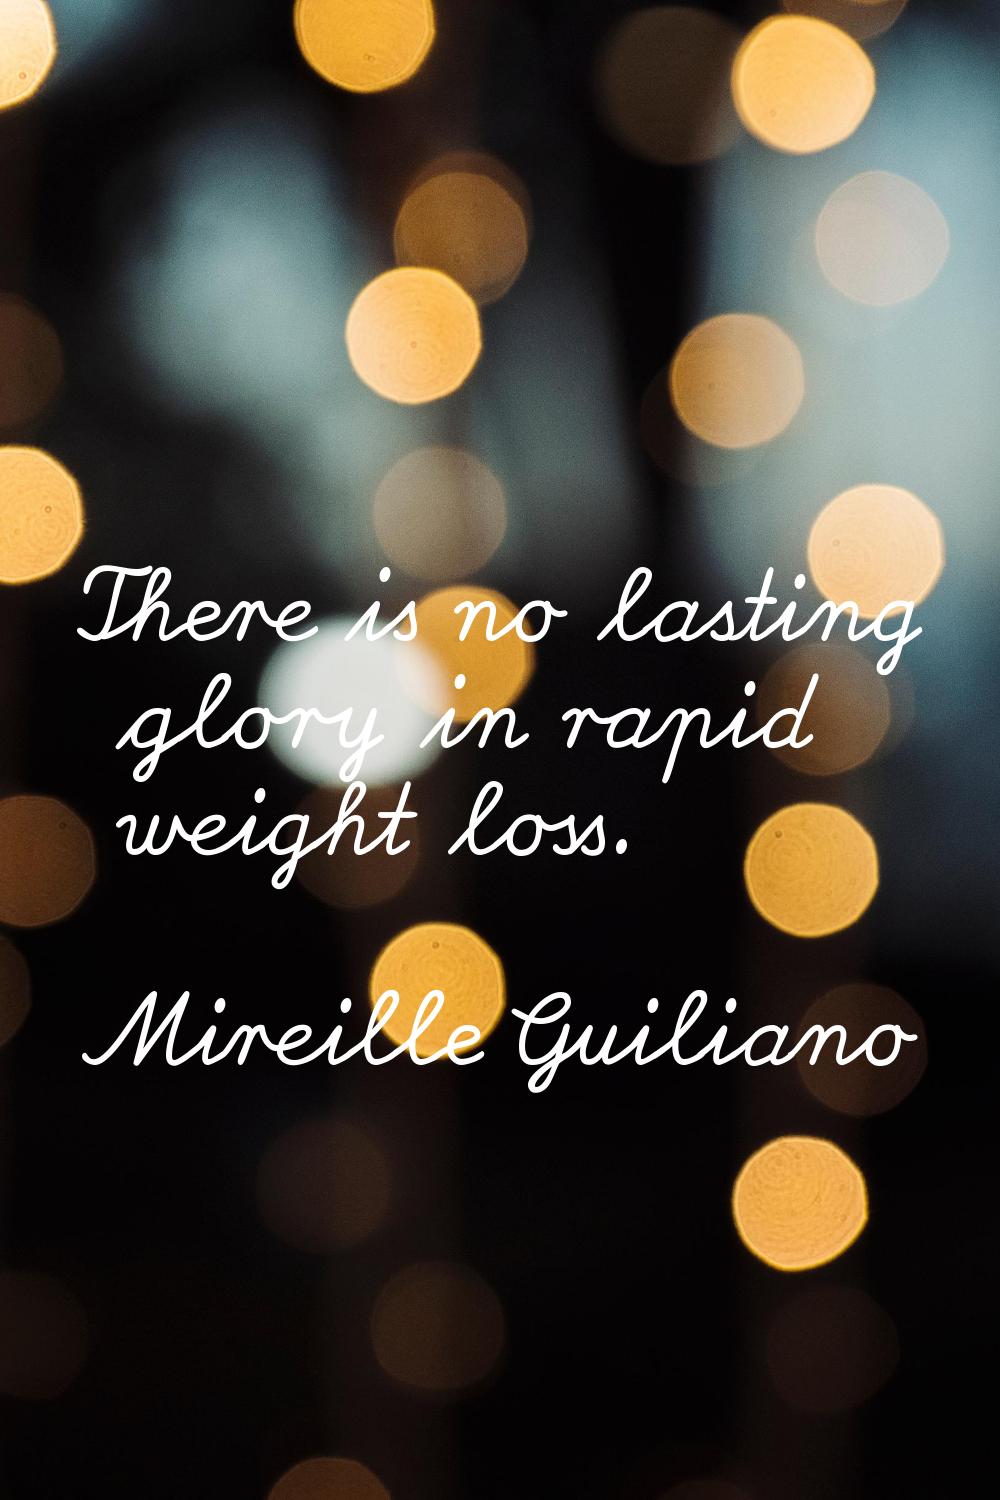 There is no lasting glory in rapid weight loss.